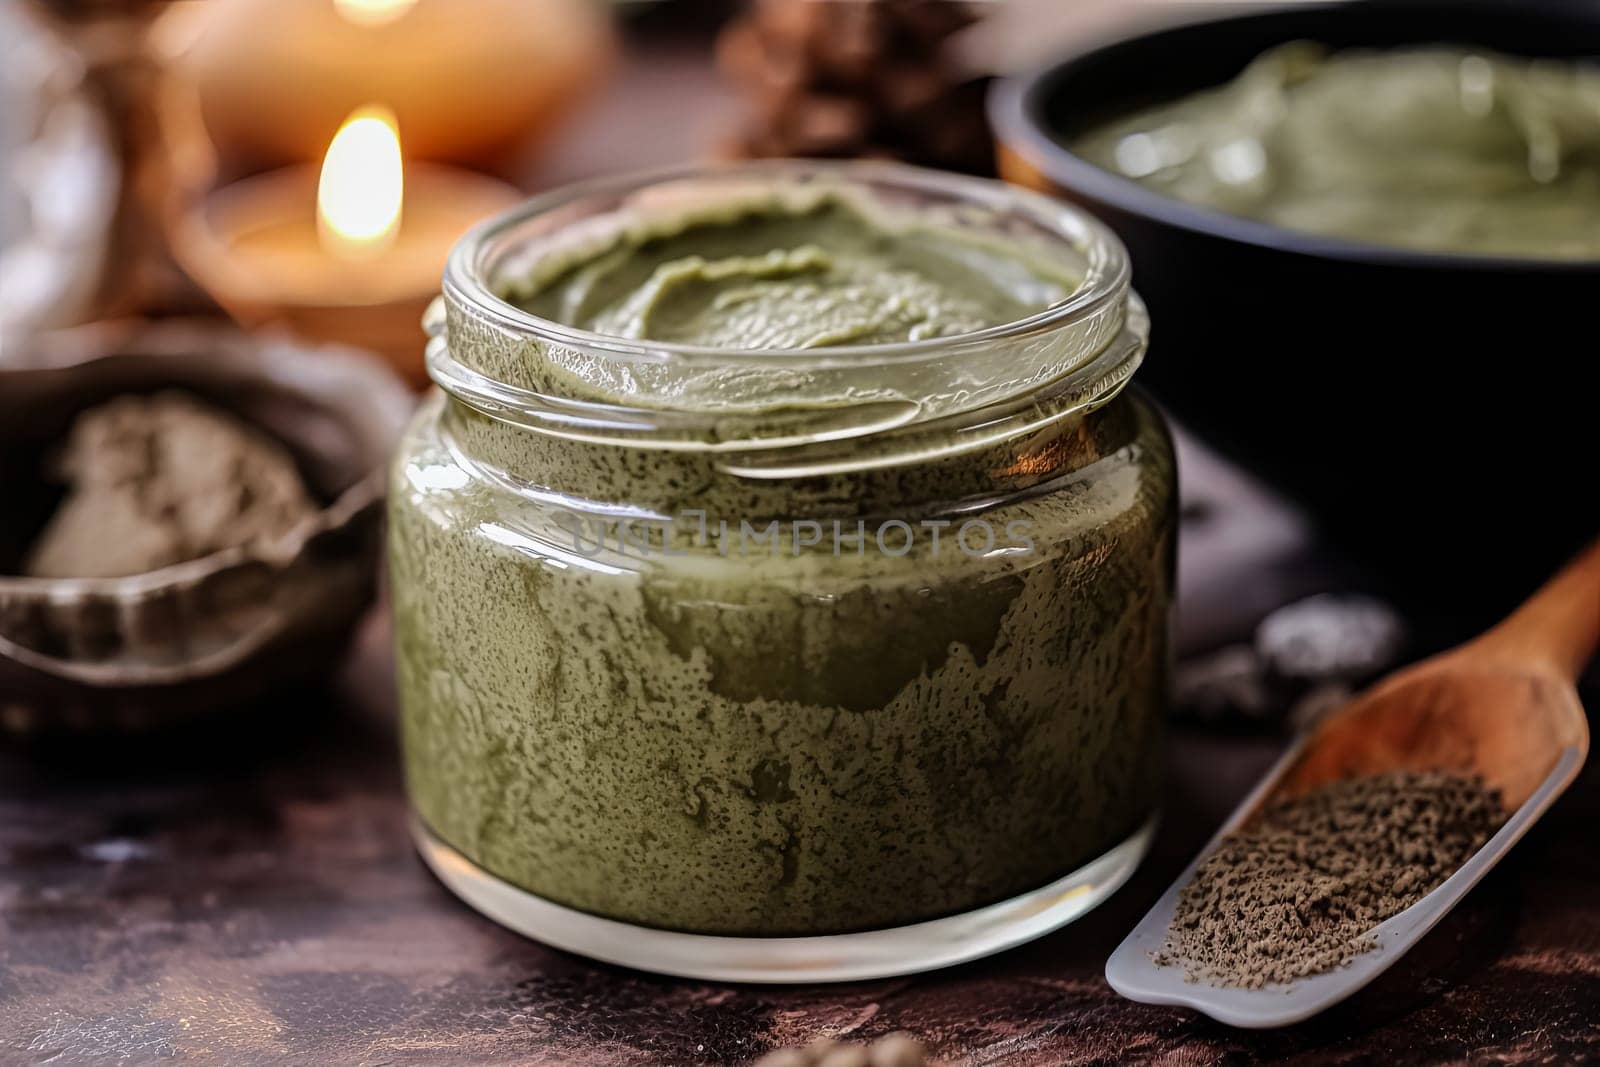 A jar of green facial clay sits on the table next to a bowl and spoon. The jar is filled with a caring face mask